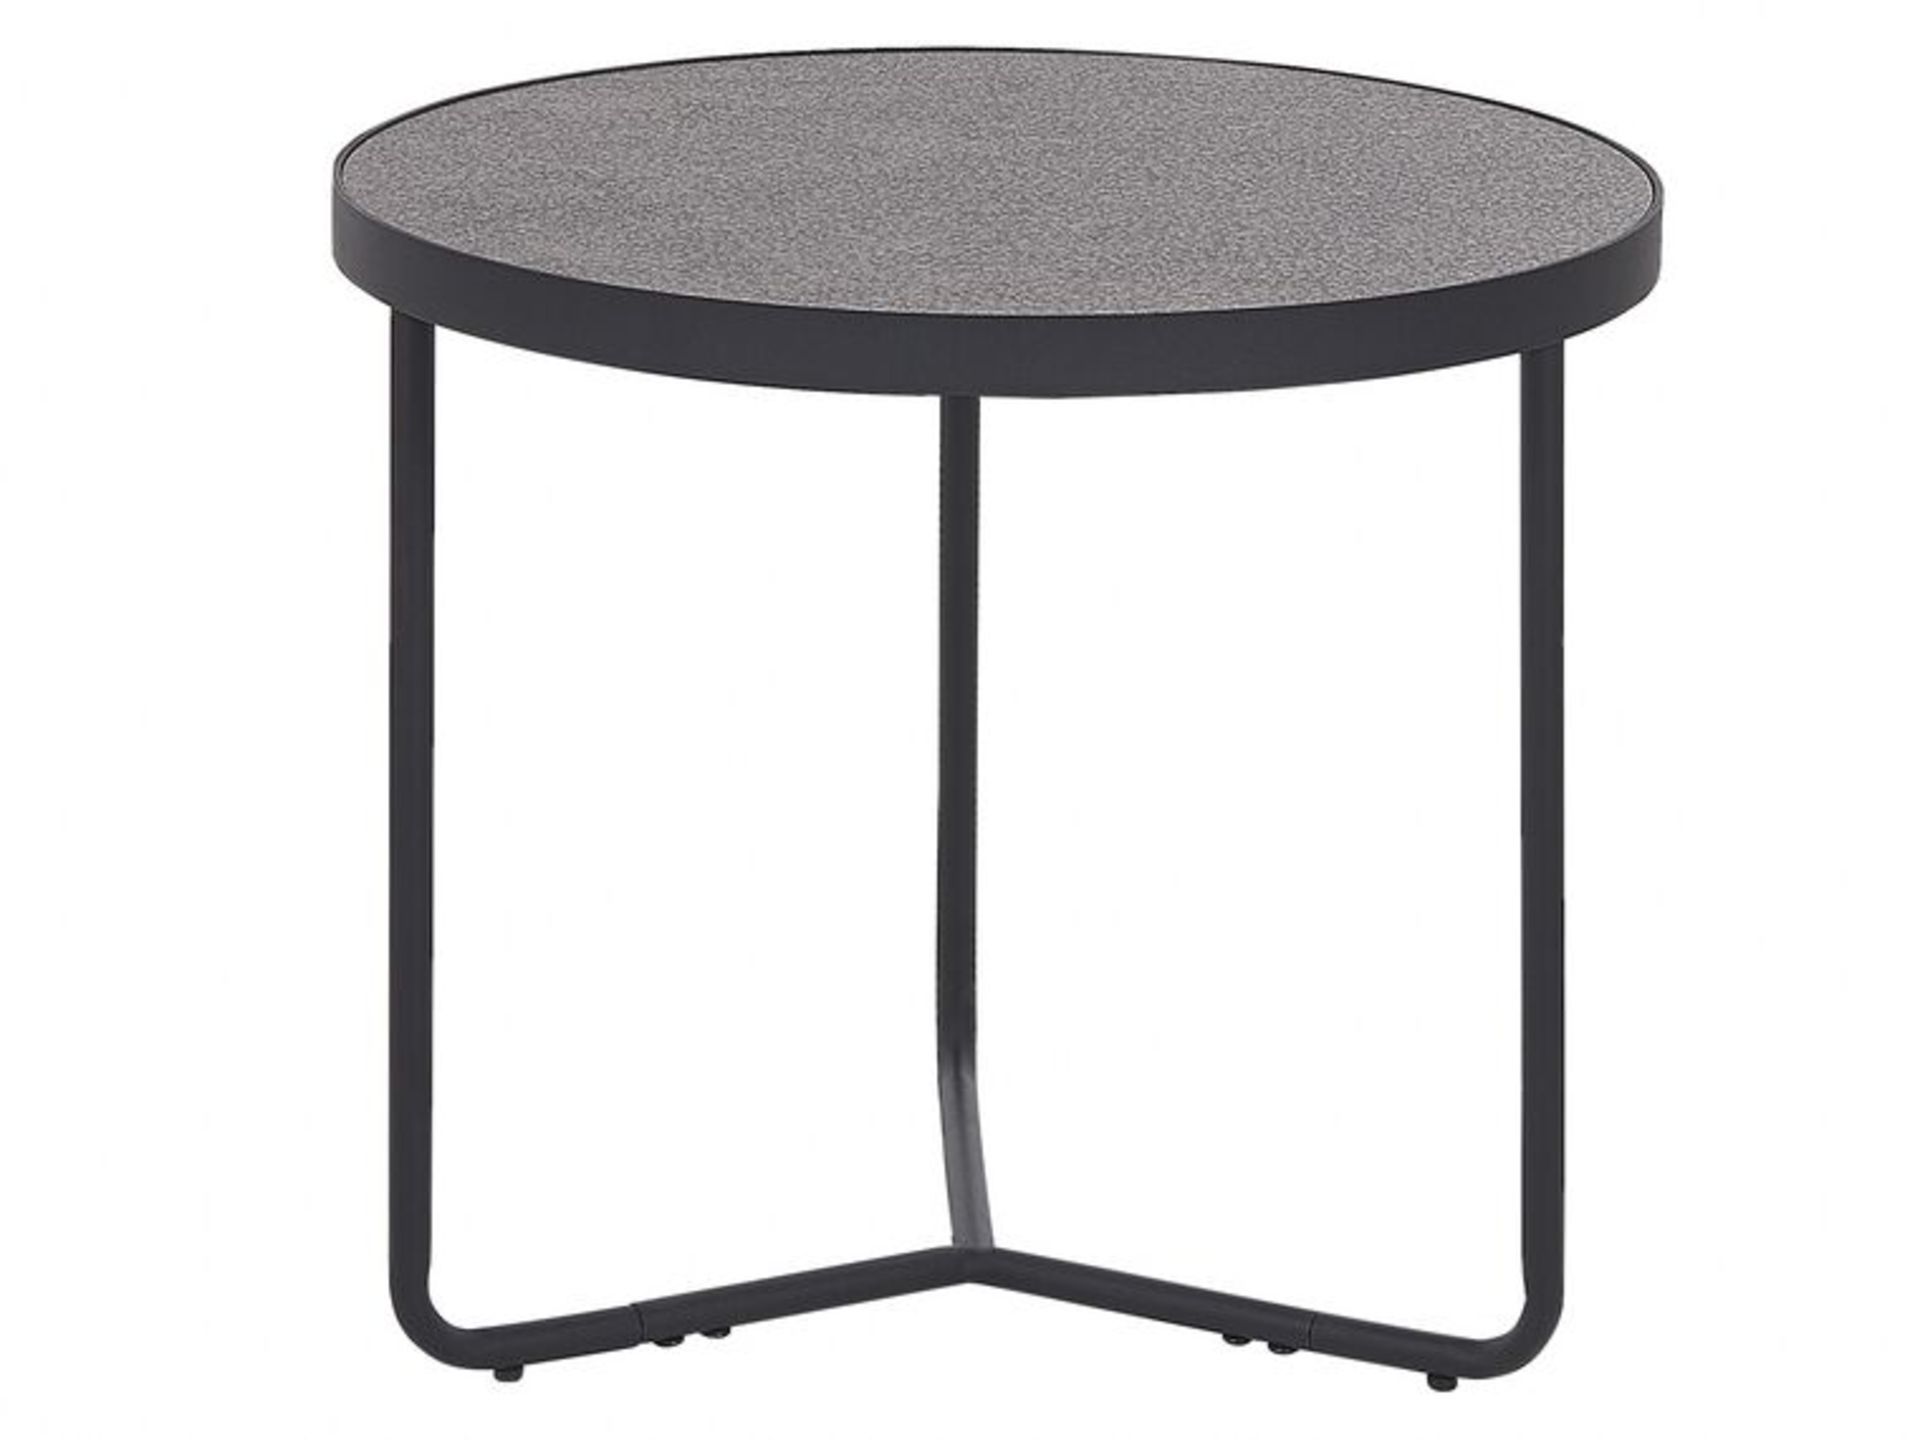 Melody Coffee Table Concrete Effect with Black. - SR6U. RRP £129.99. Add some character and create